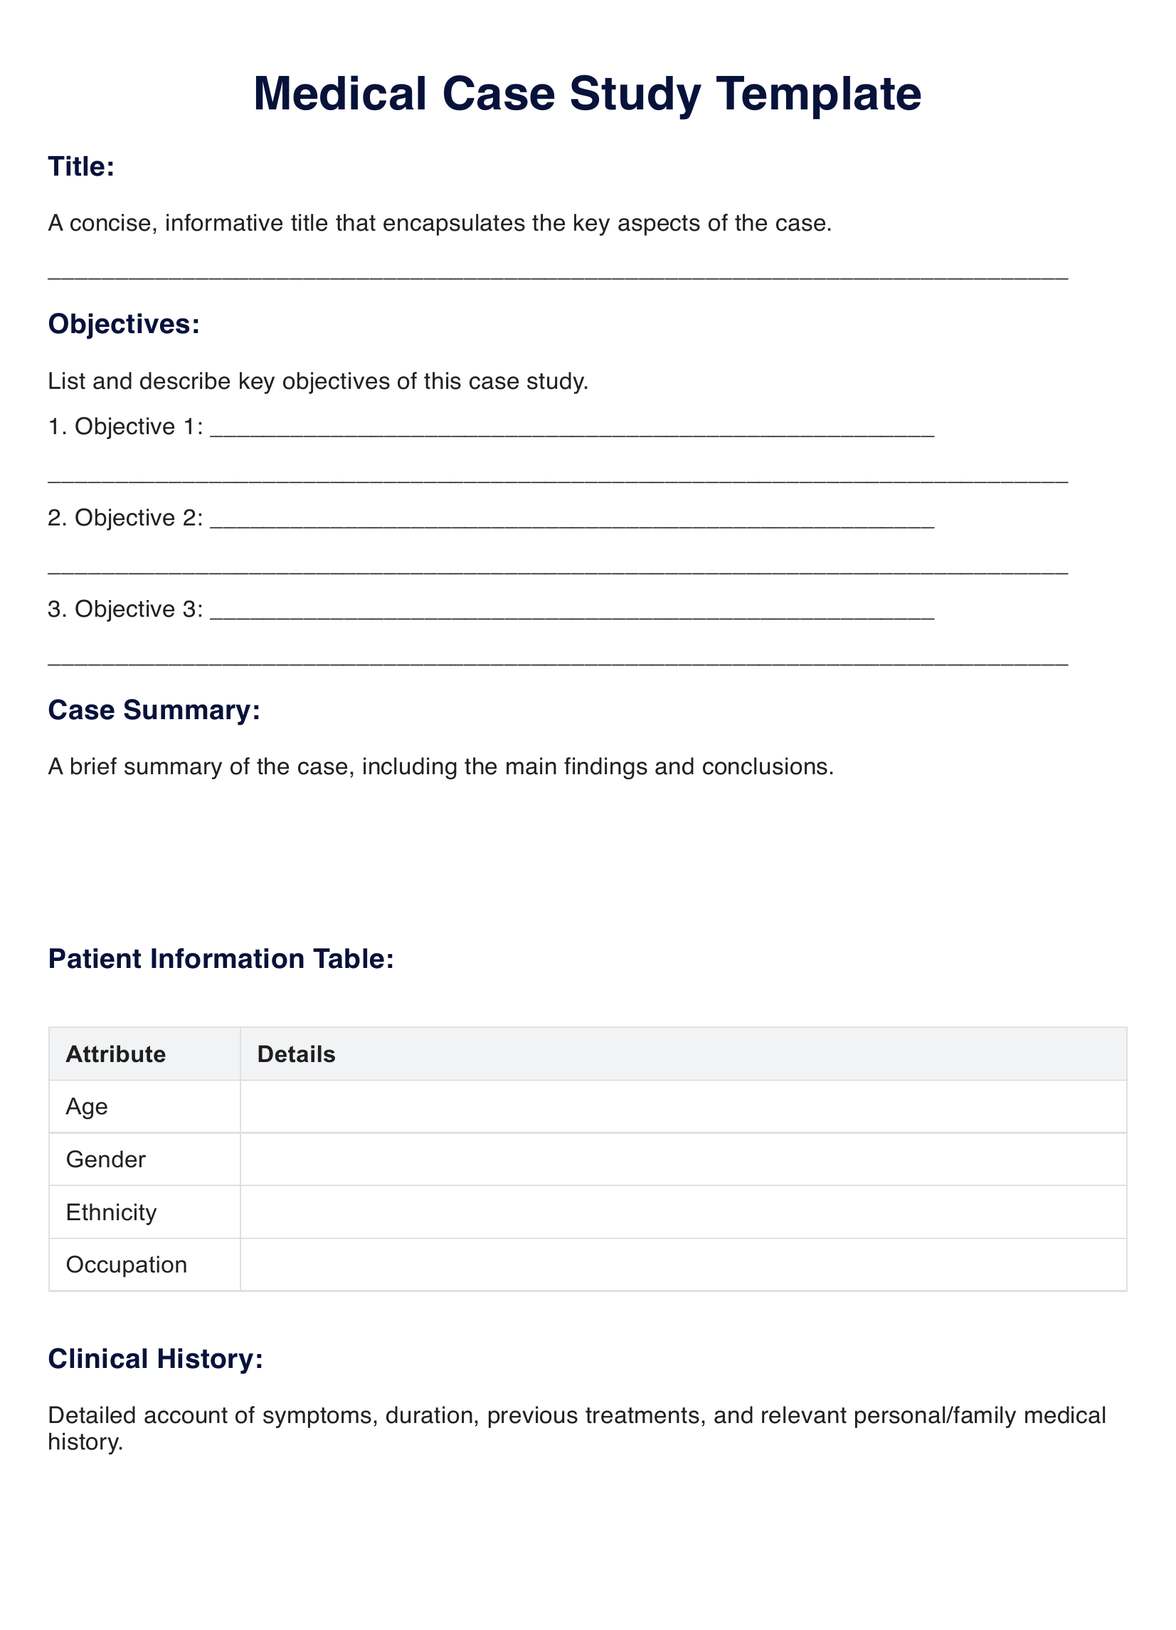 Medical Case Study Template PDF Example